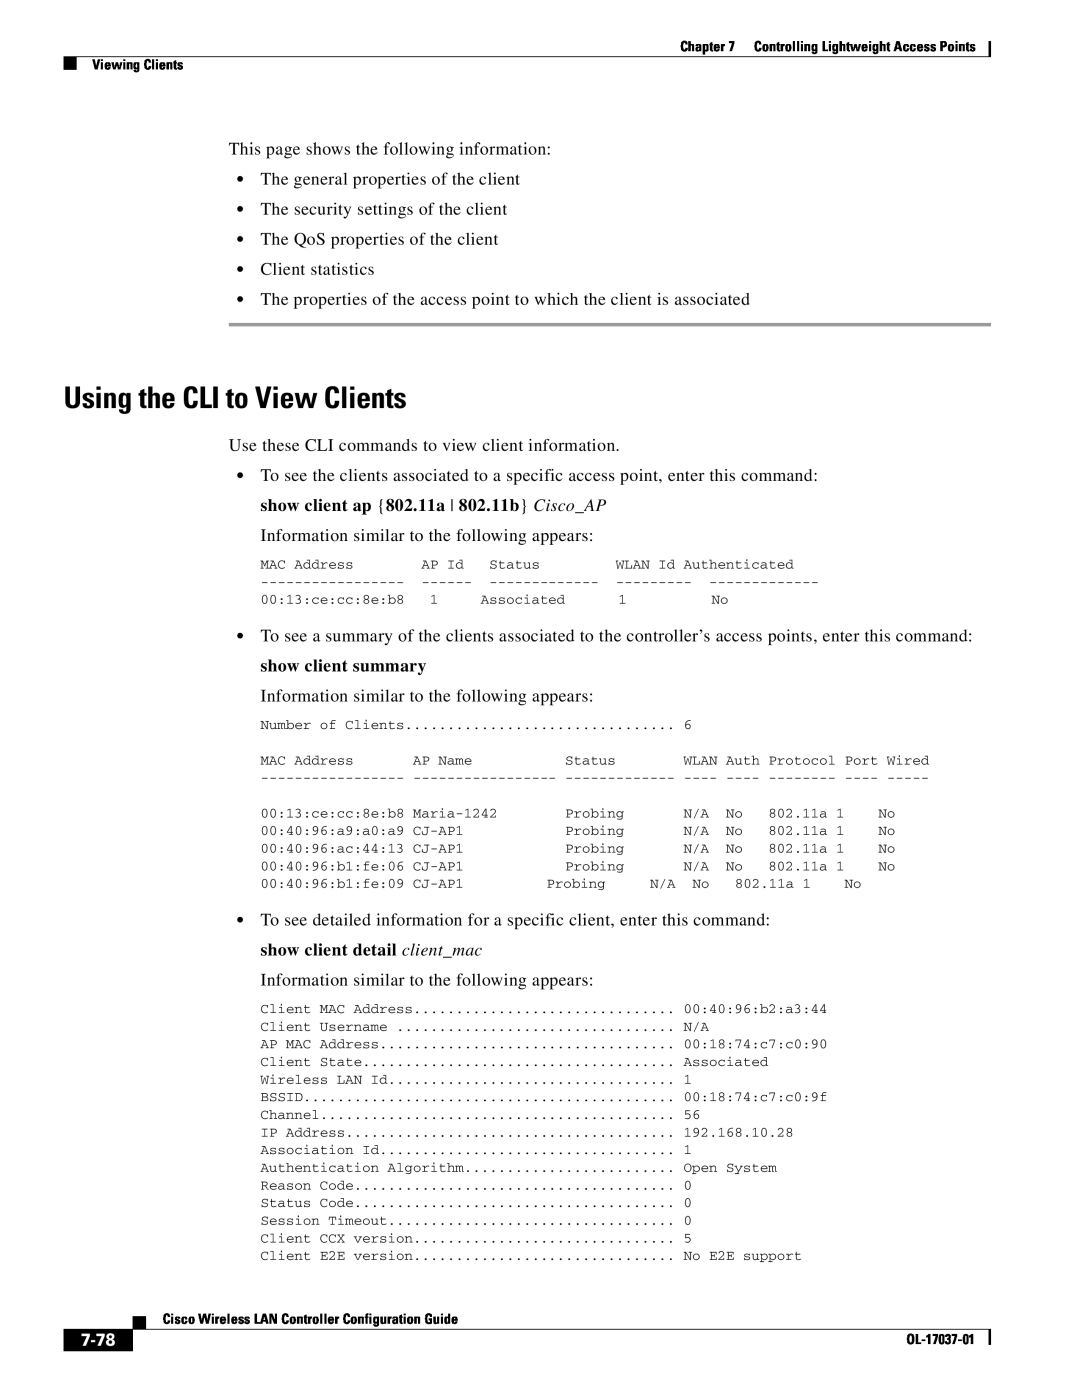 Cisco Systems OL-17037-01 manual Using the CLI to View Clients, 7-78 